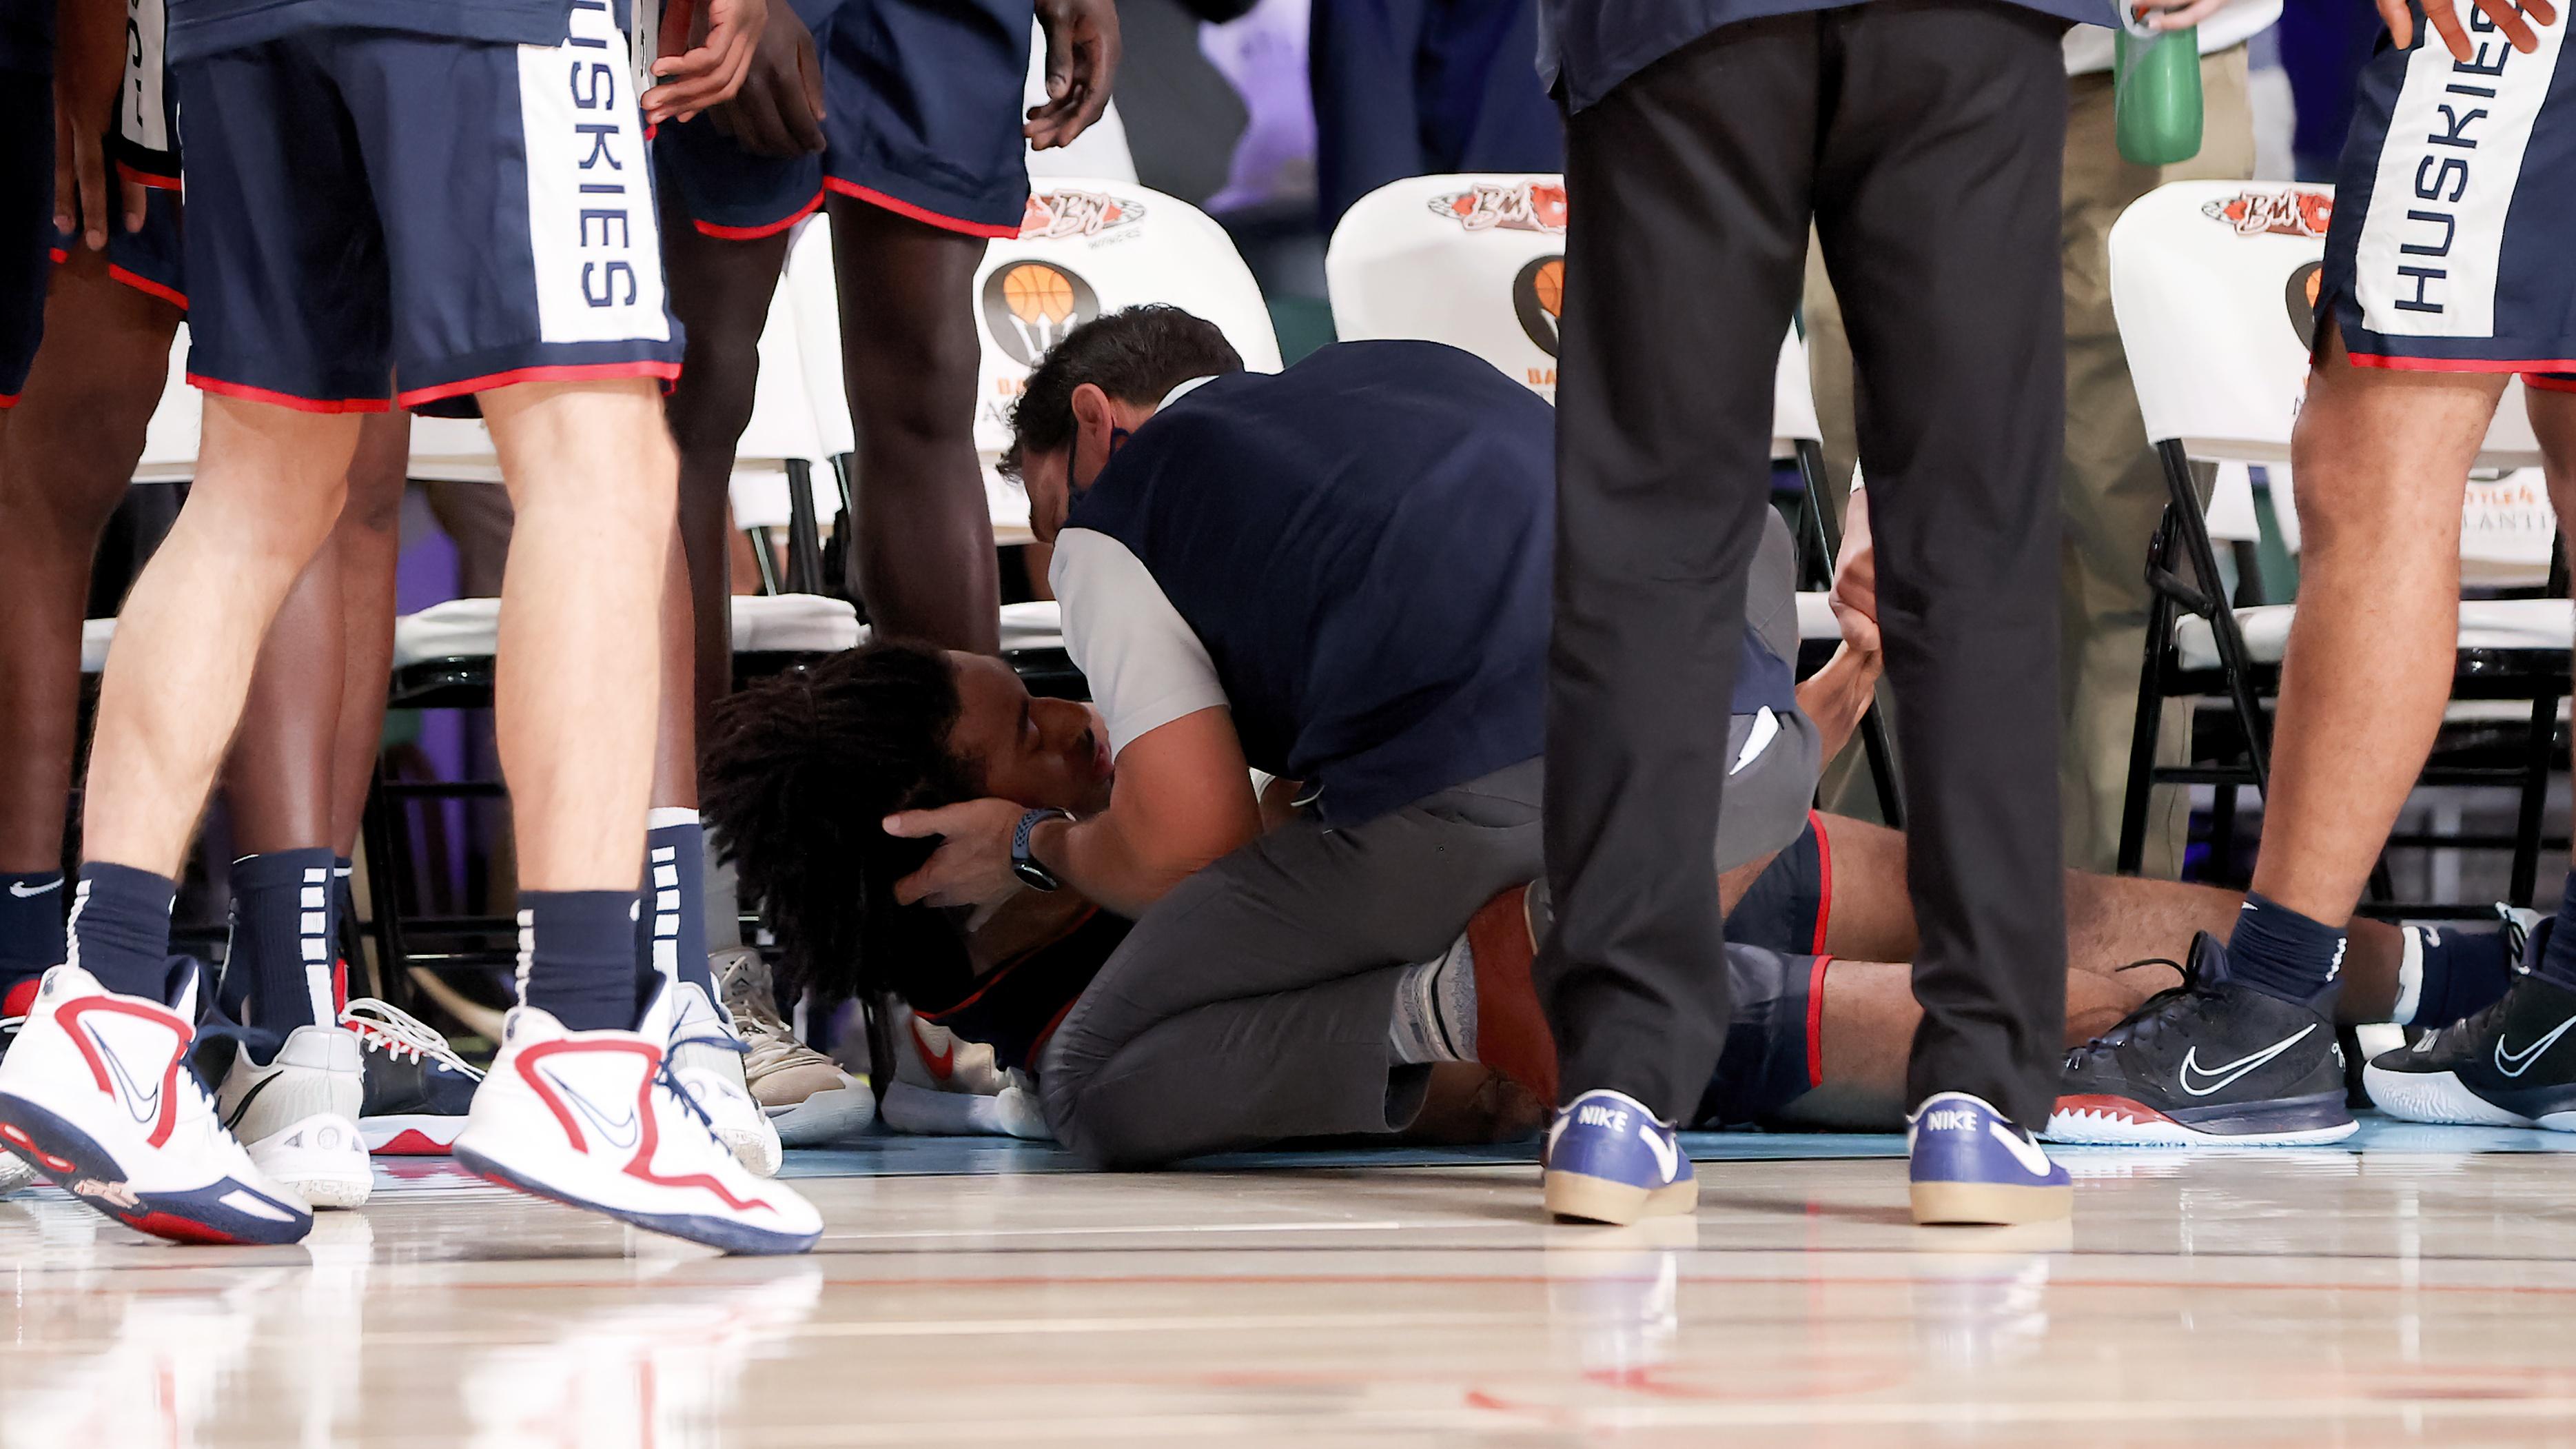 Nov 24, 2021; Nassau, BHS; Connecticut Huskies forward Isaiah Whaley (5) receives medical attention after the game against the Auburn Tigers in the 2021 Battle 4 Atlantis at Imperial Arena. Mandatory Credit: Kevin Jairaj-USA TODAY Sports / © Kevin Jairaj-USA TODAY Sports